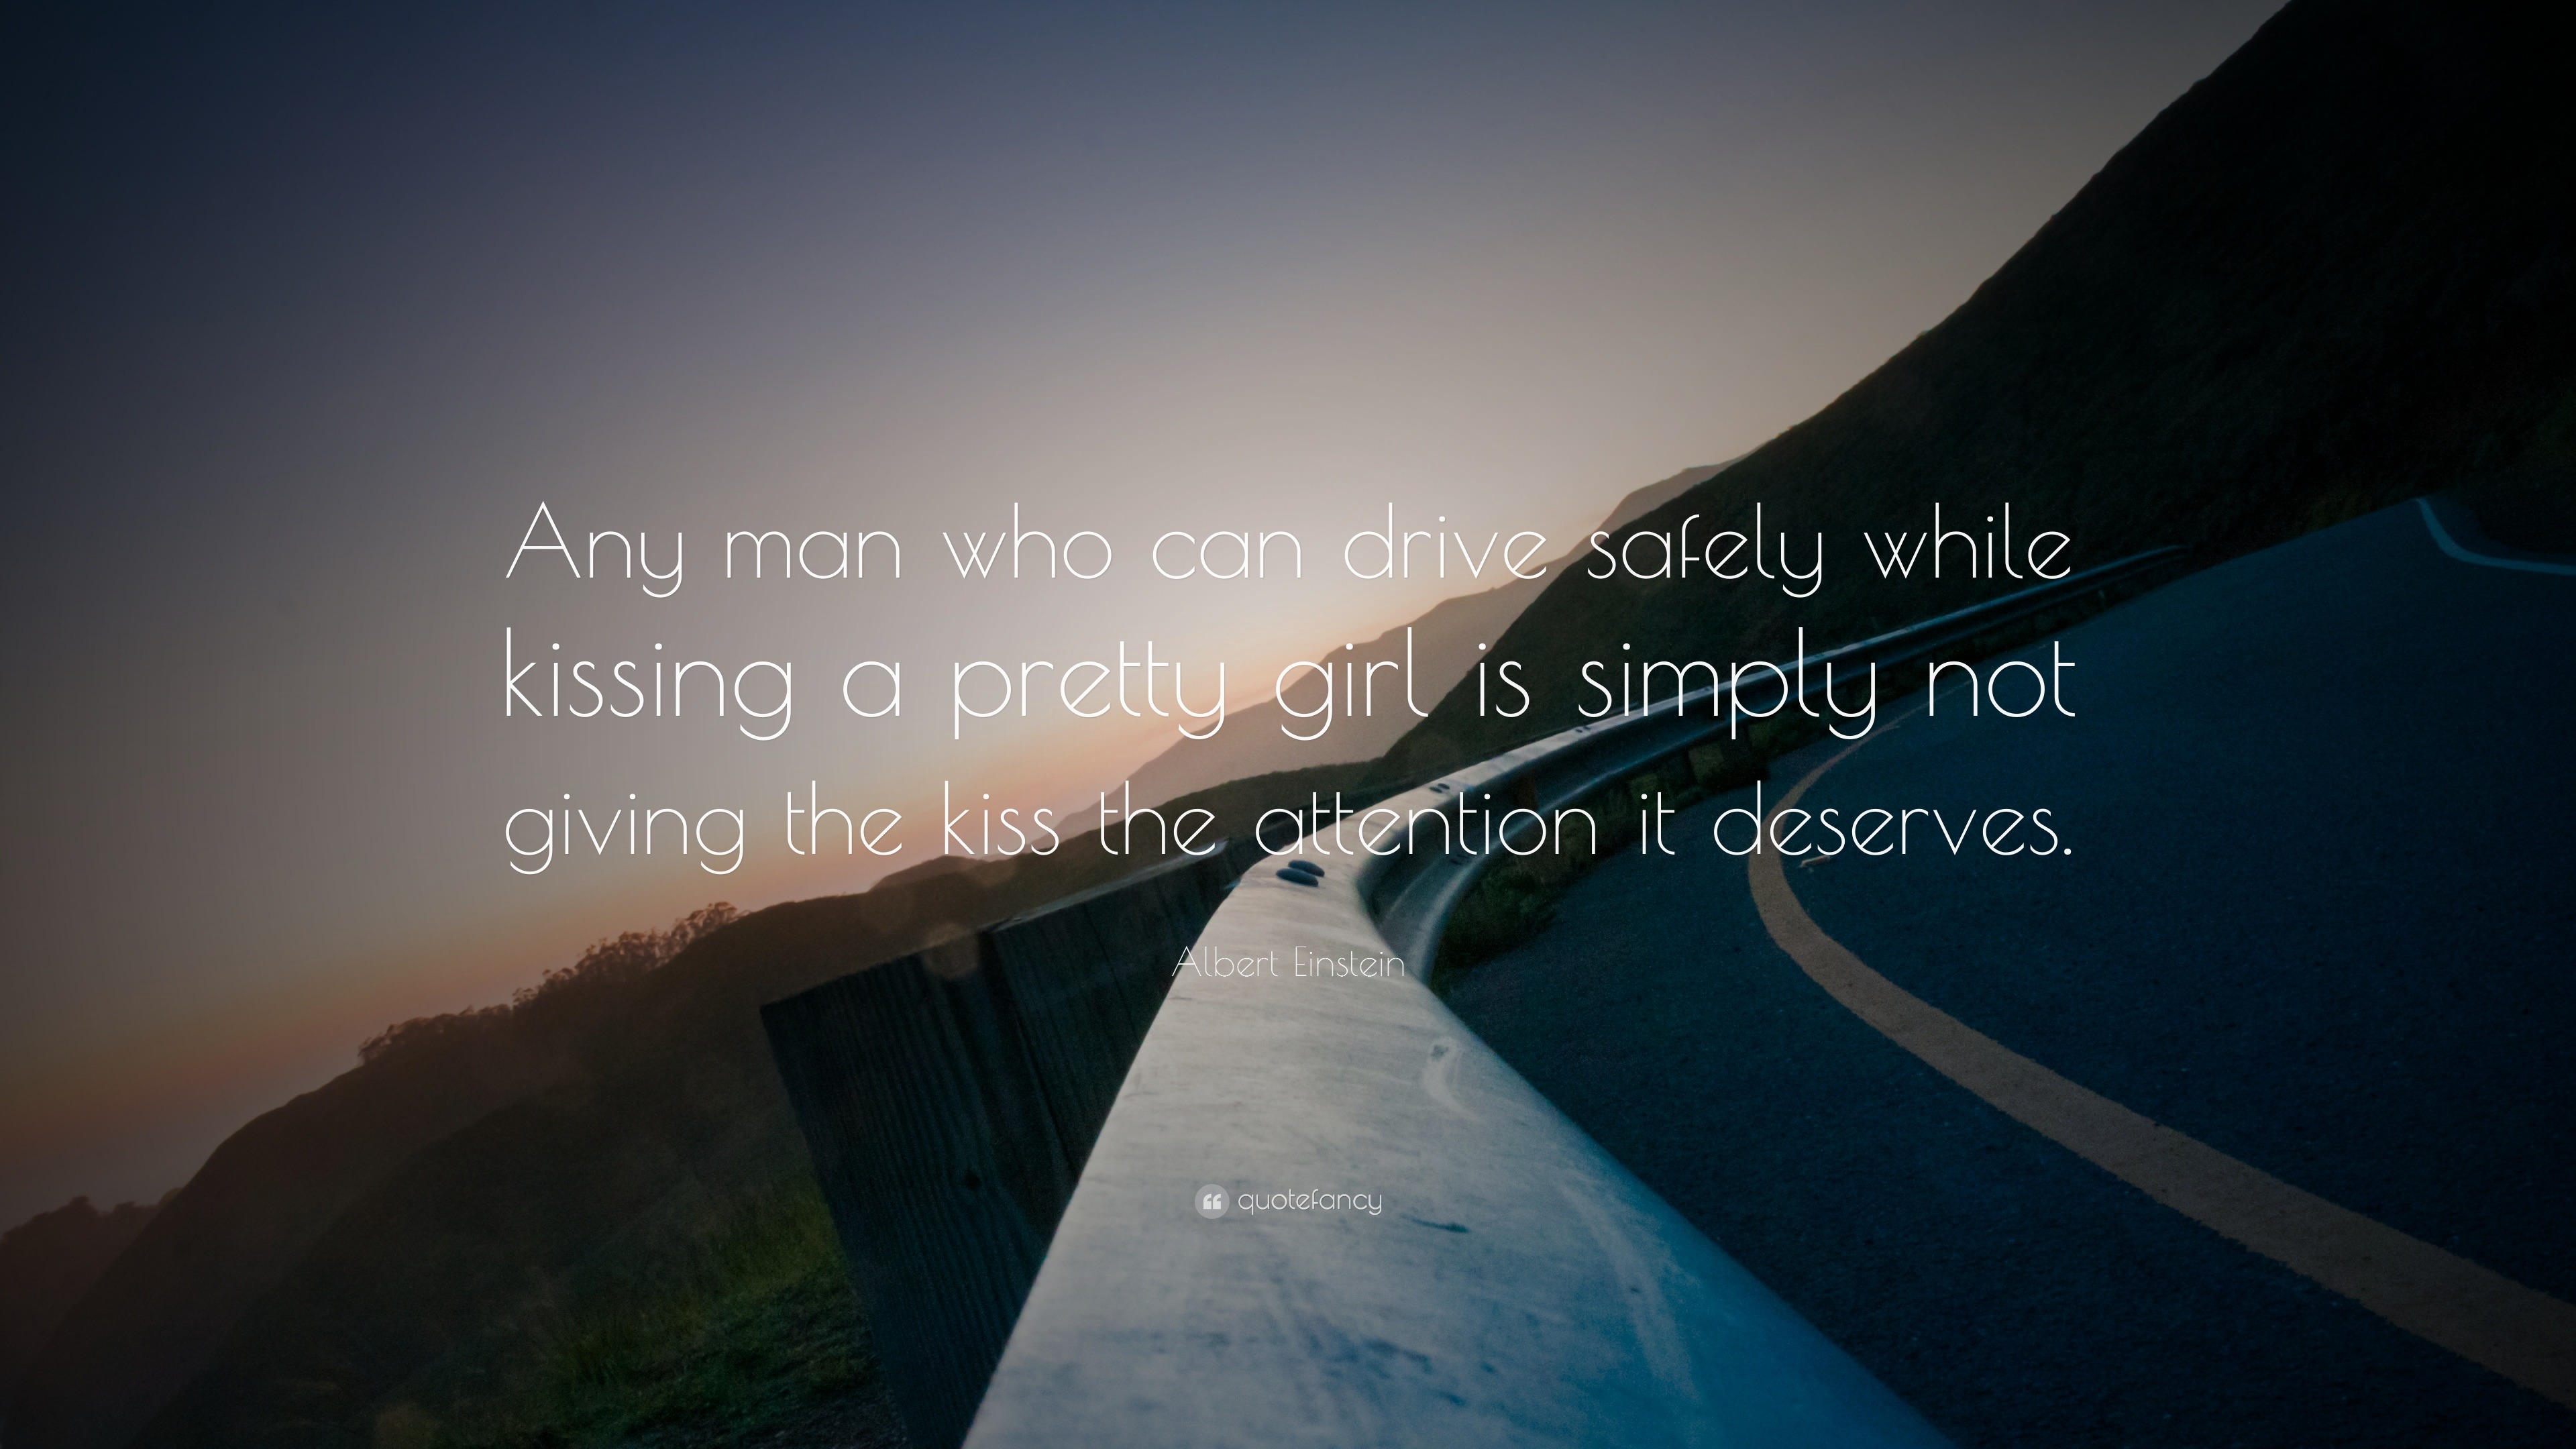 Albert Einstein Quote: “Any man who can drive safely while ...